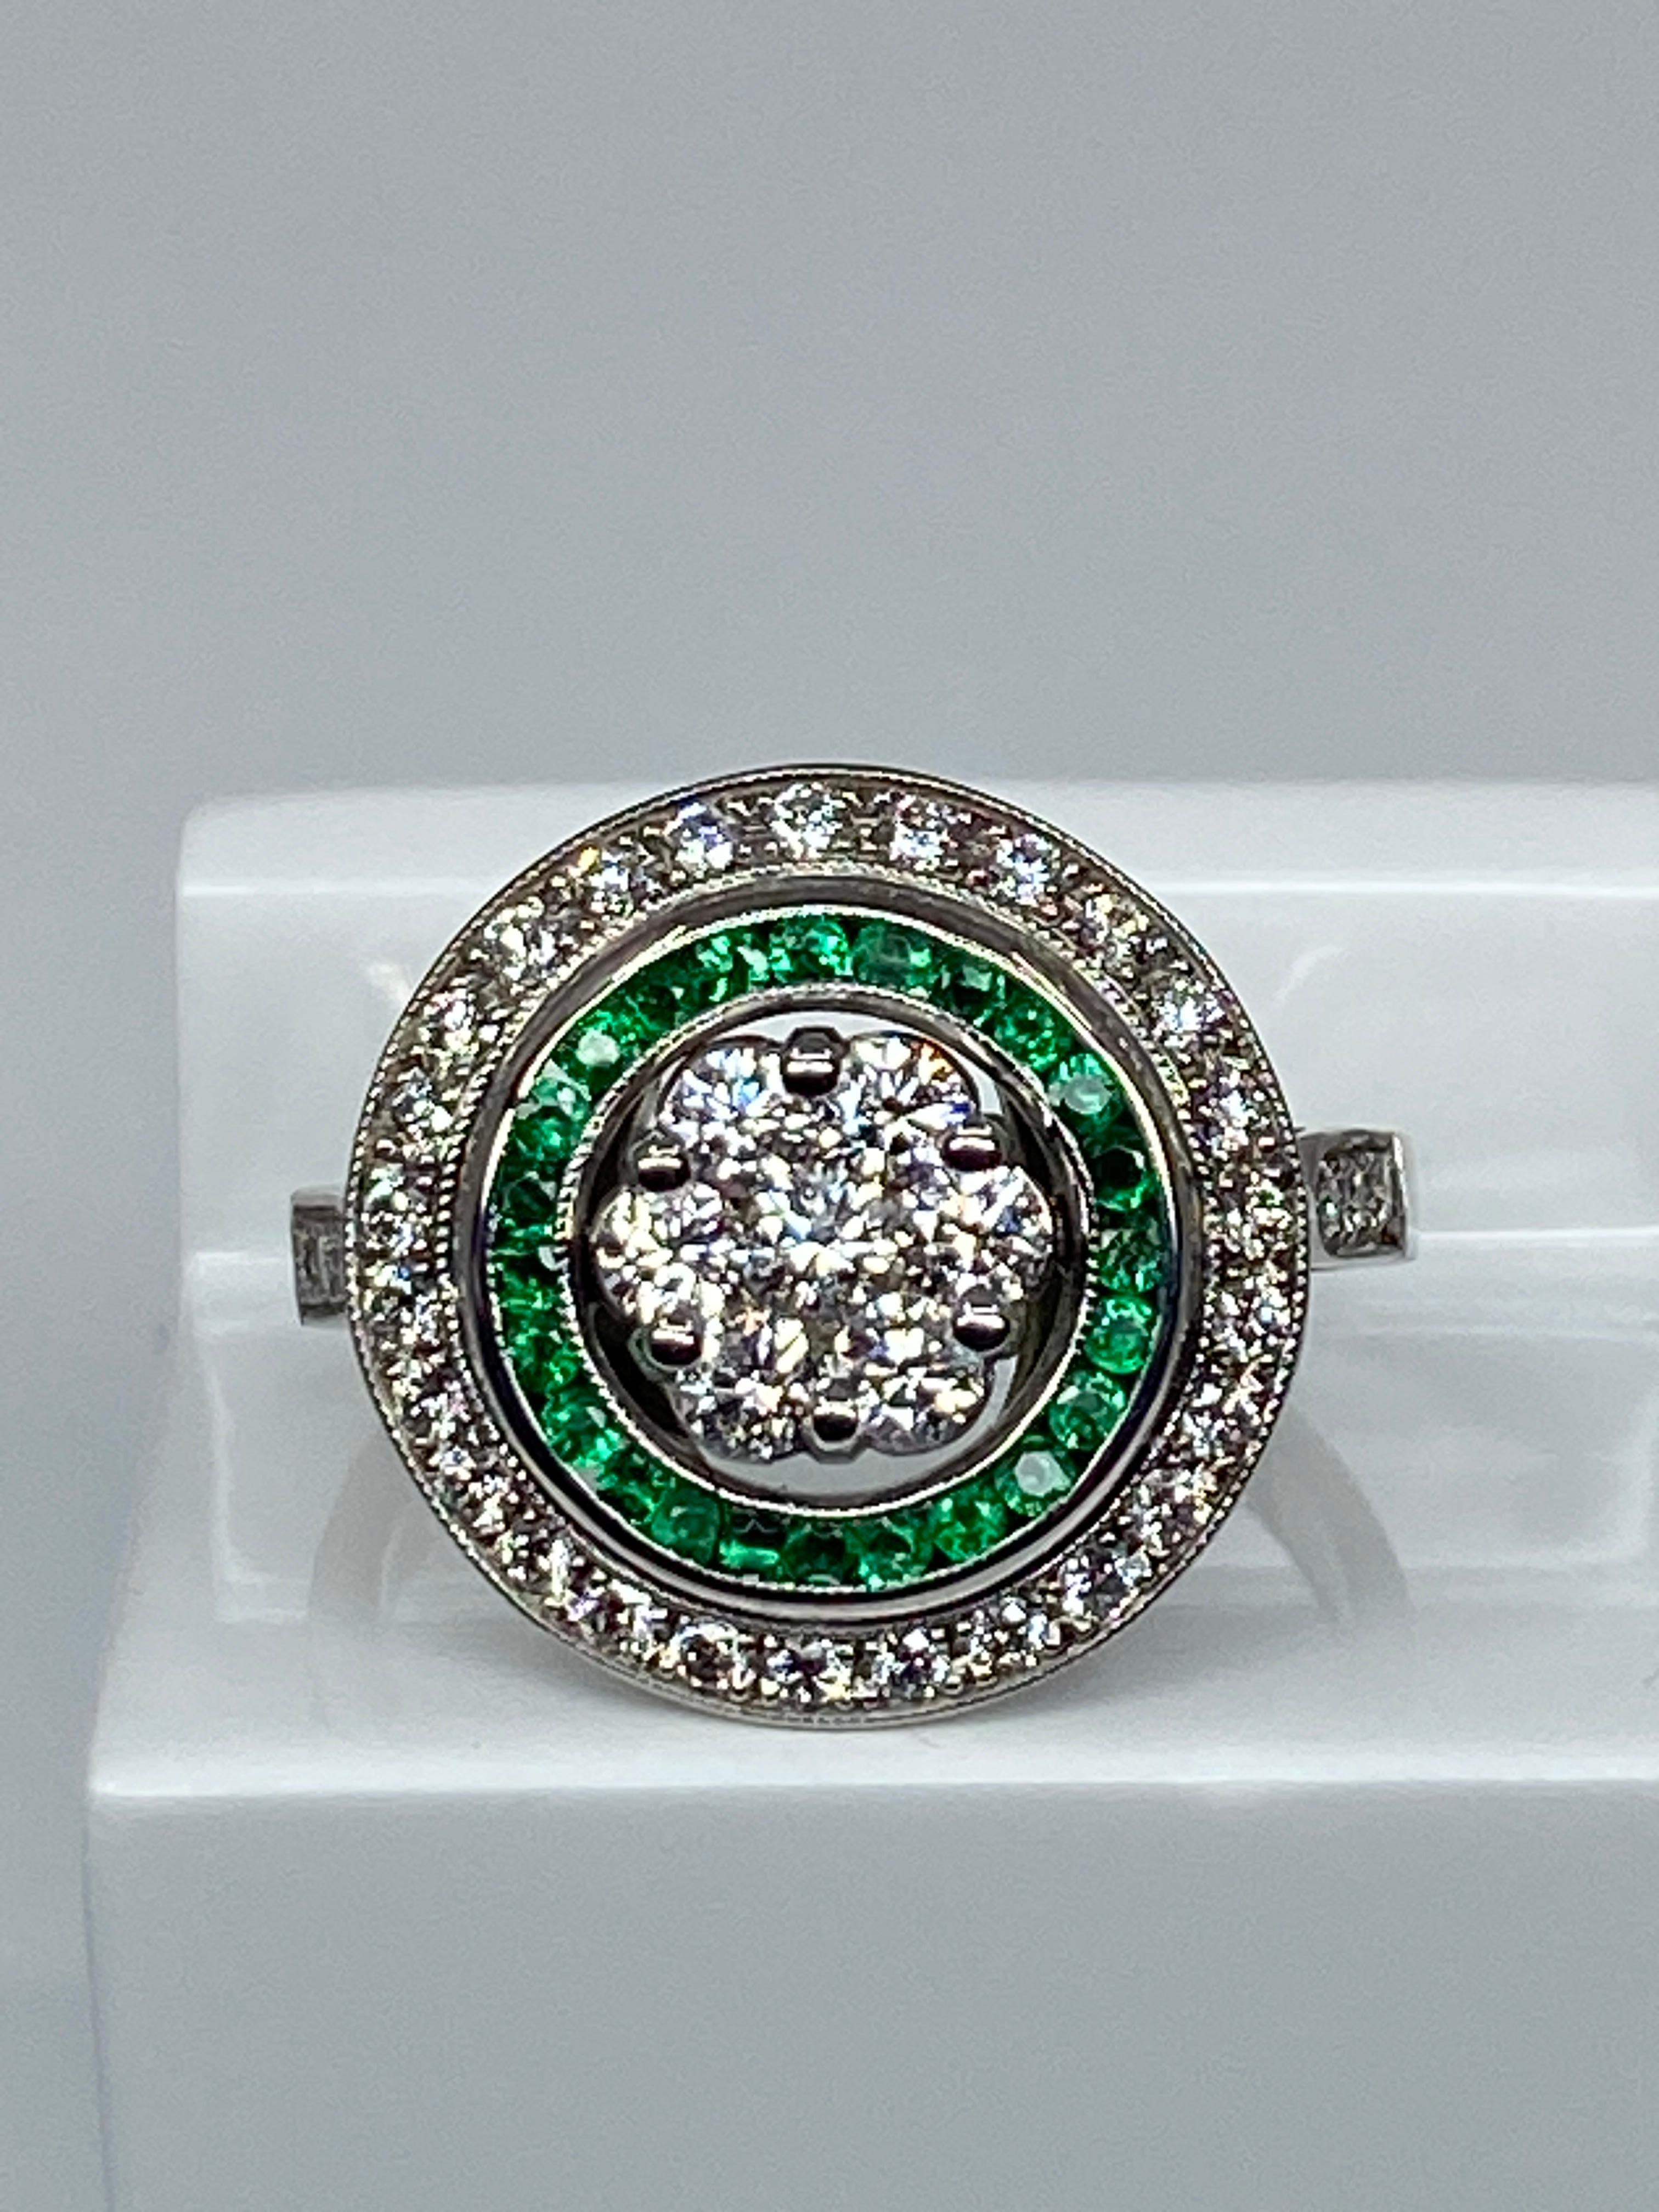 18 Carat Gold Round Ring Set with Calibrated Emeralds and Diamonds Art Déco Styl 10